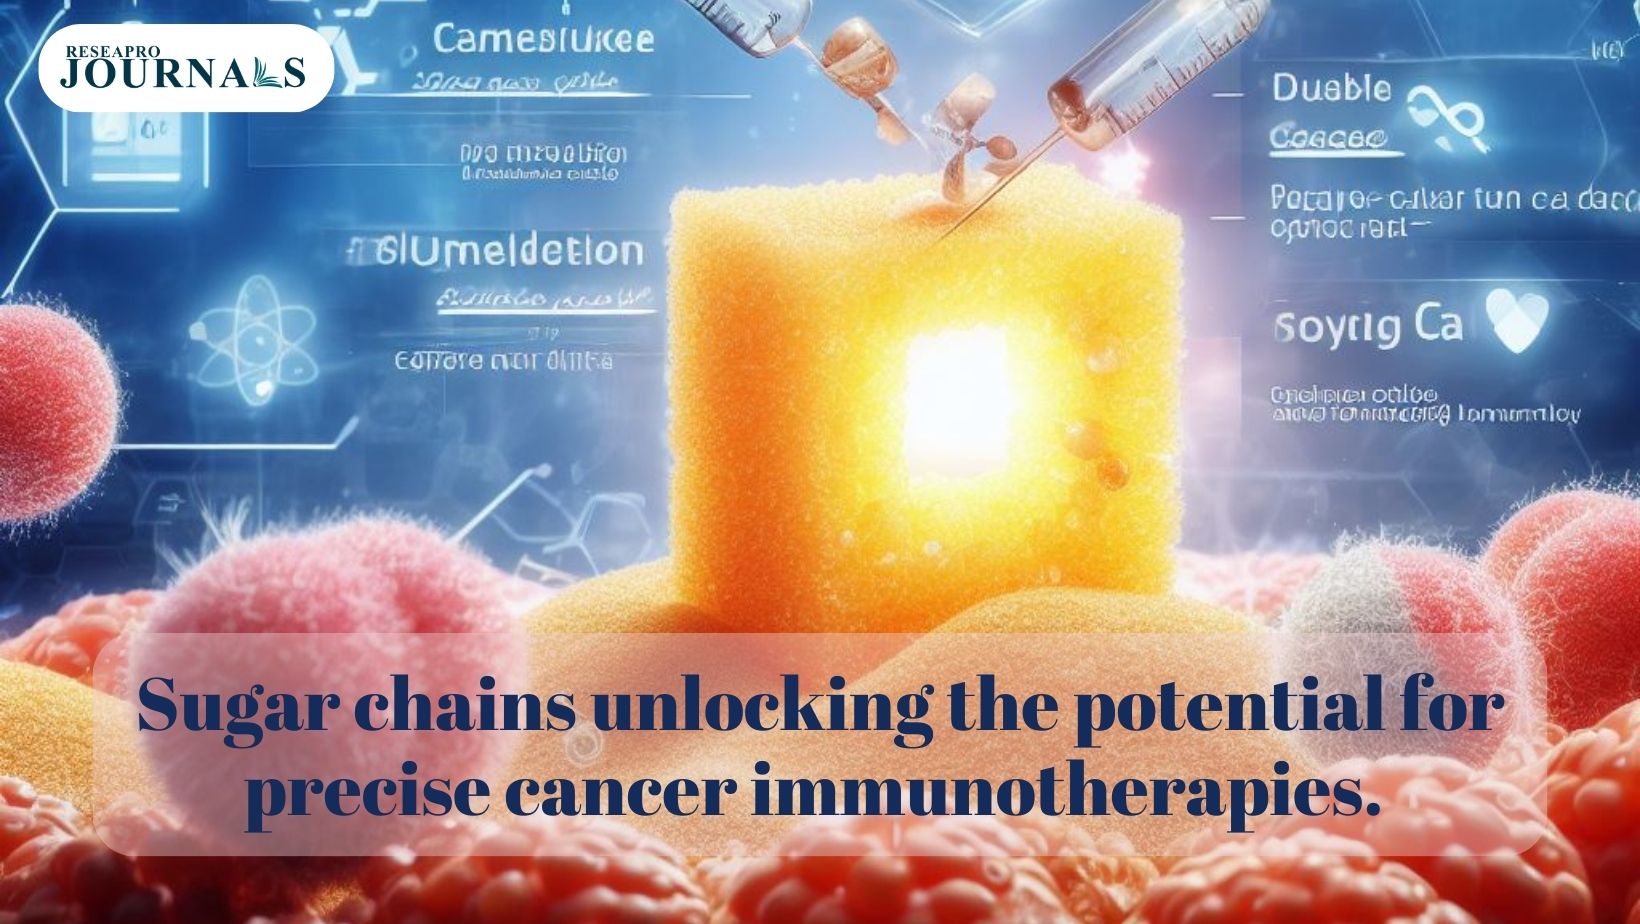 Sugar chains unlocking the potential for precise cancer immunotherapies.